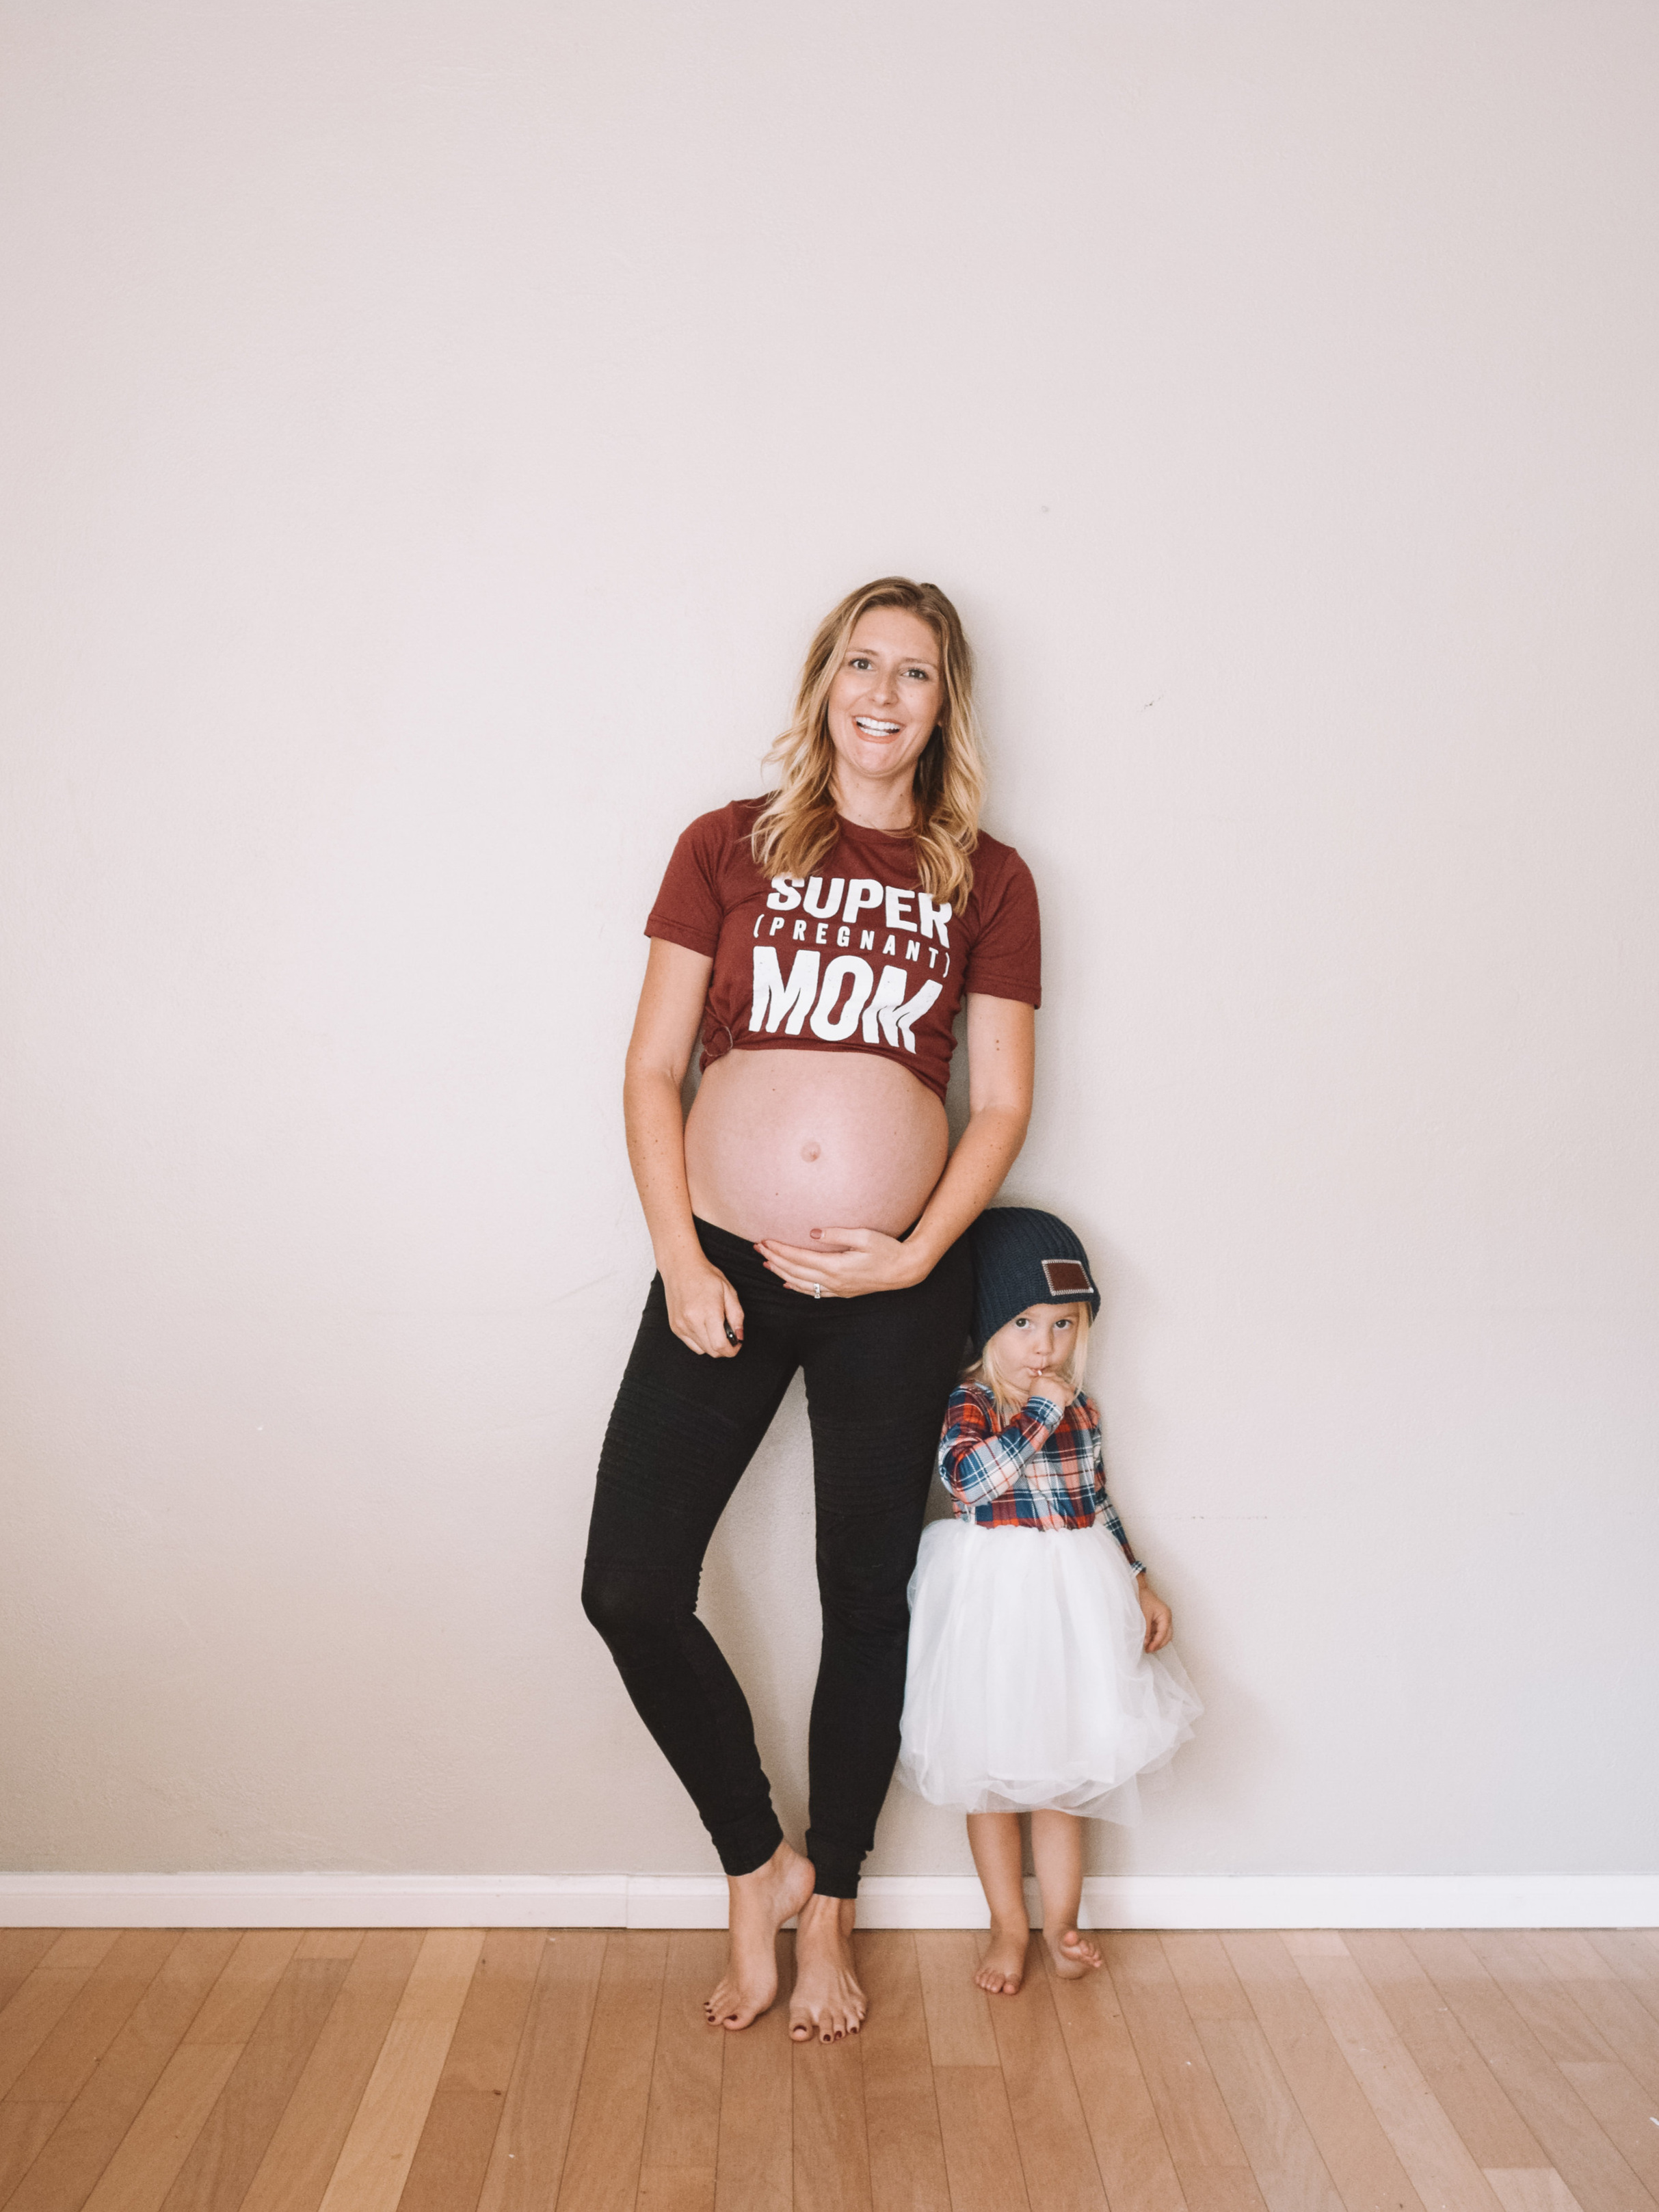 Funny Pregnancy Shirts - Cute Weekly Pregnancy Photos - The Overwhelmed Mommy Blogger